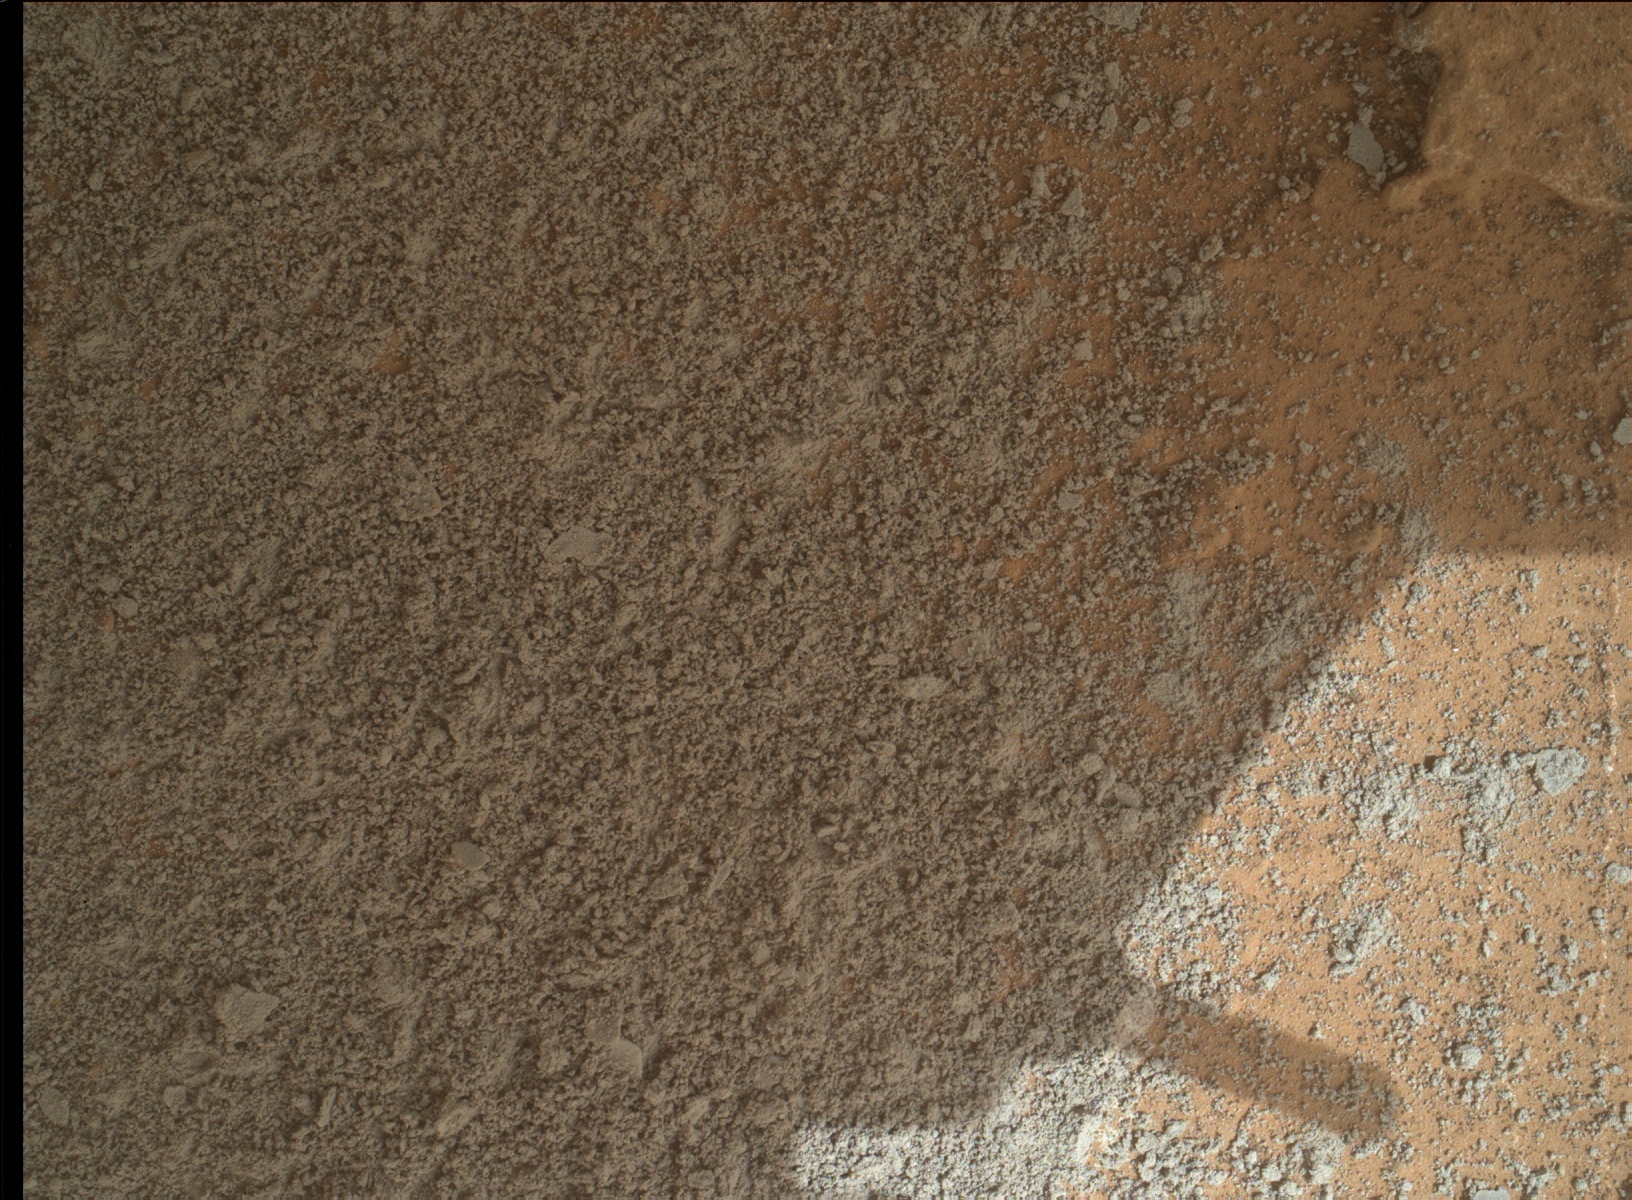 Nasa's Mars rover Curiosity acquired this image using its Mars Hand Lens Imager (MAHLI) on Sol 2686